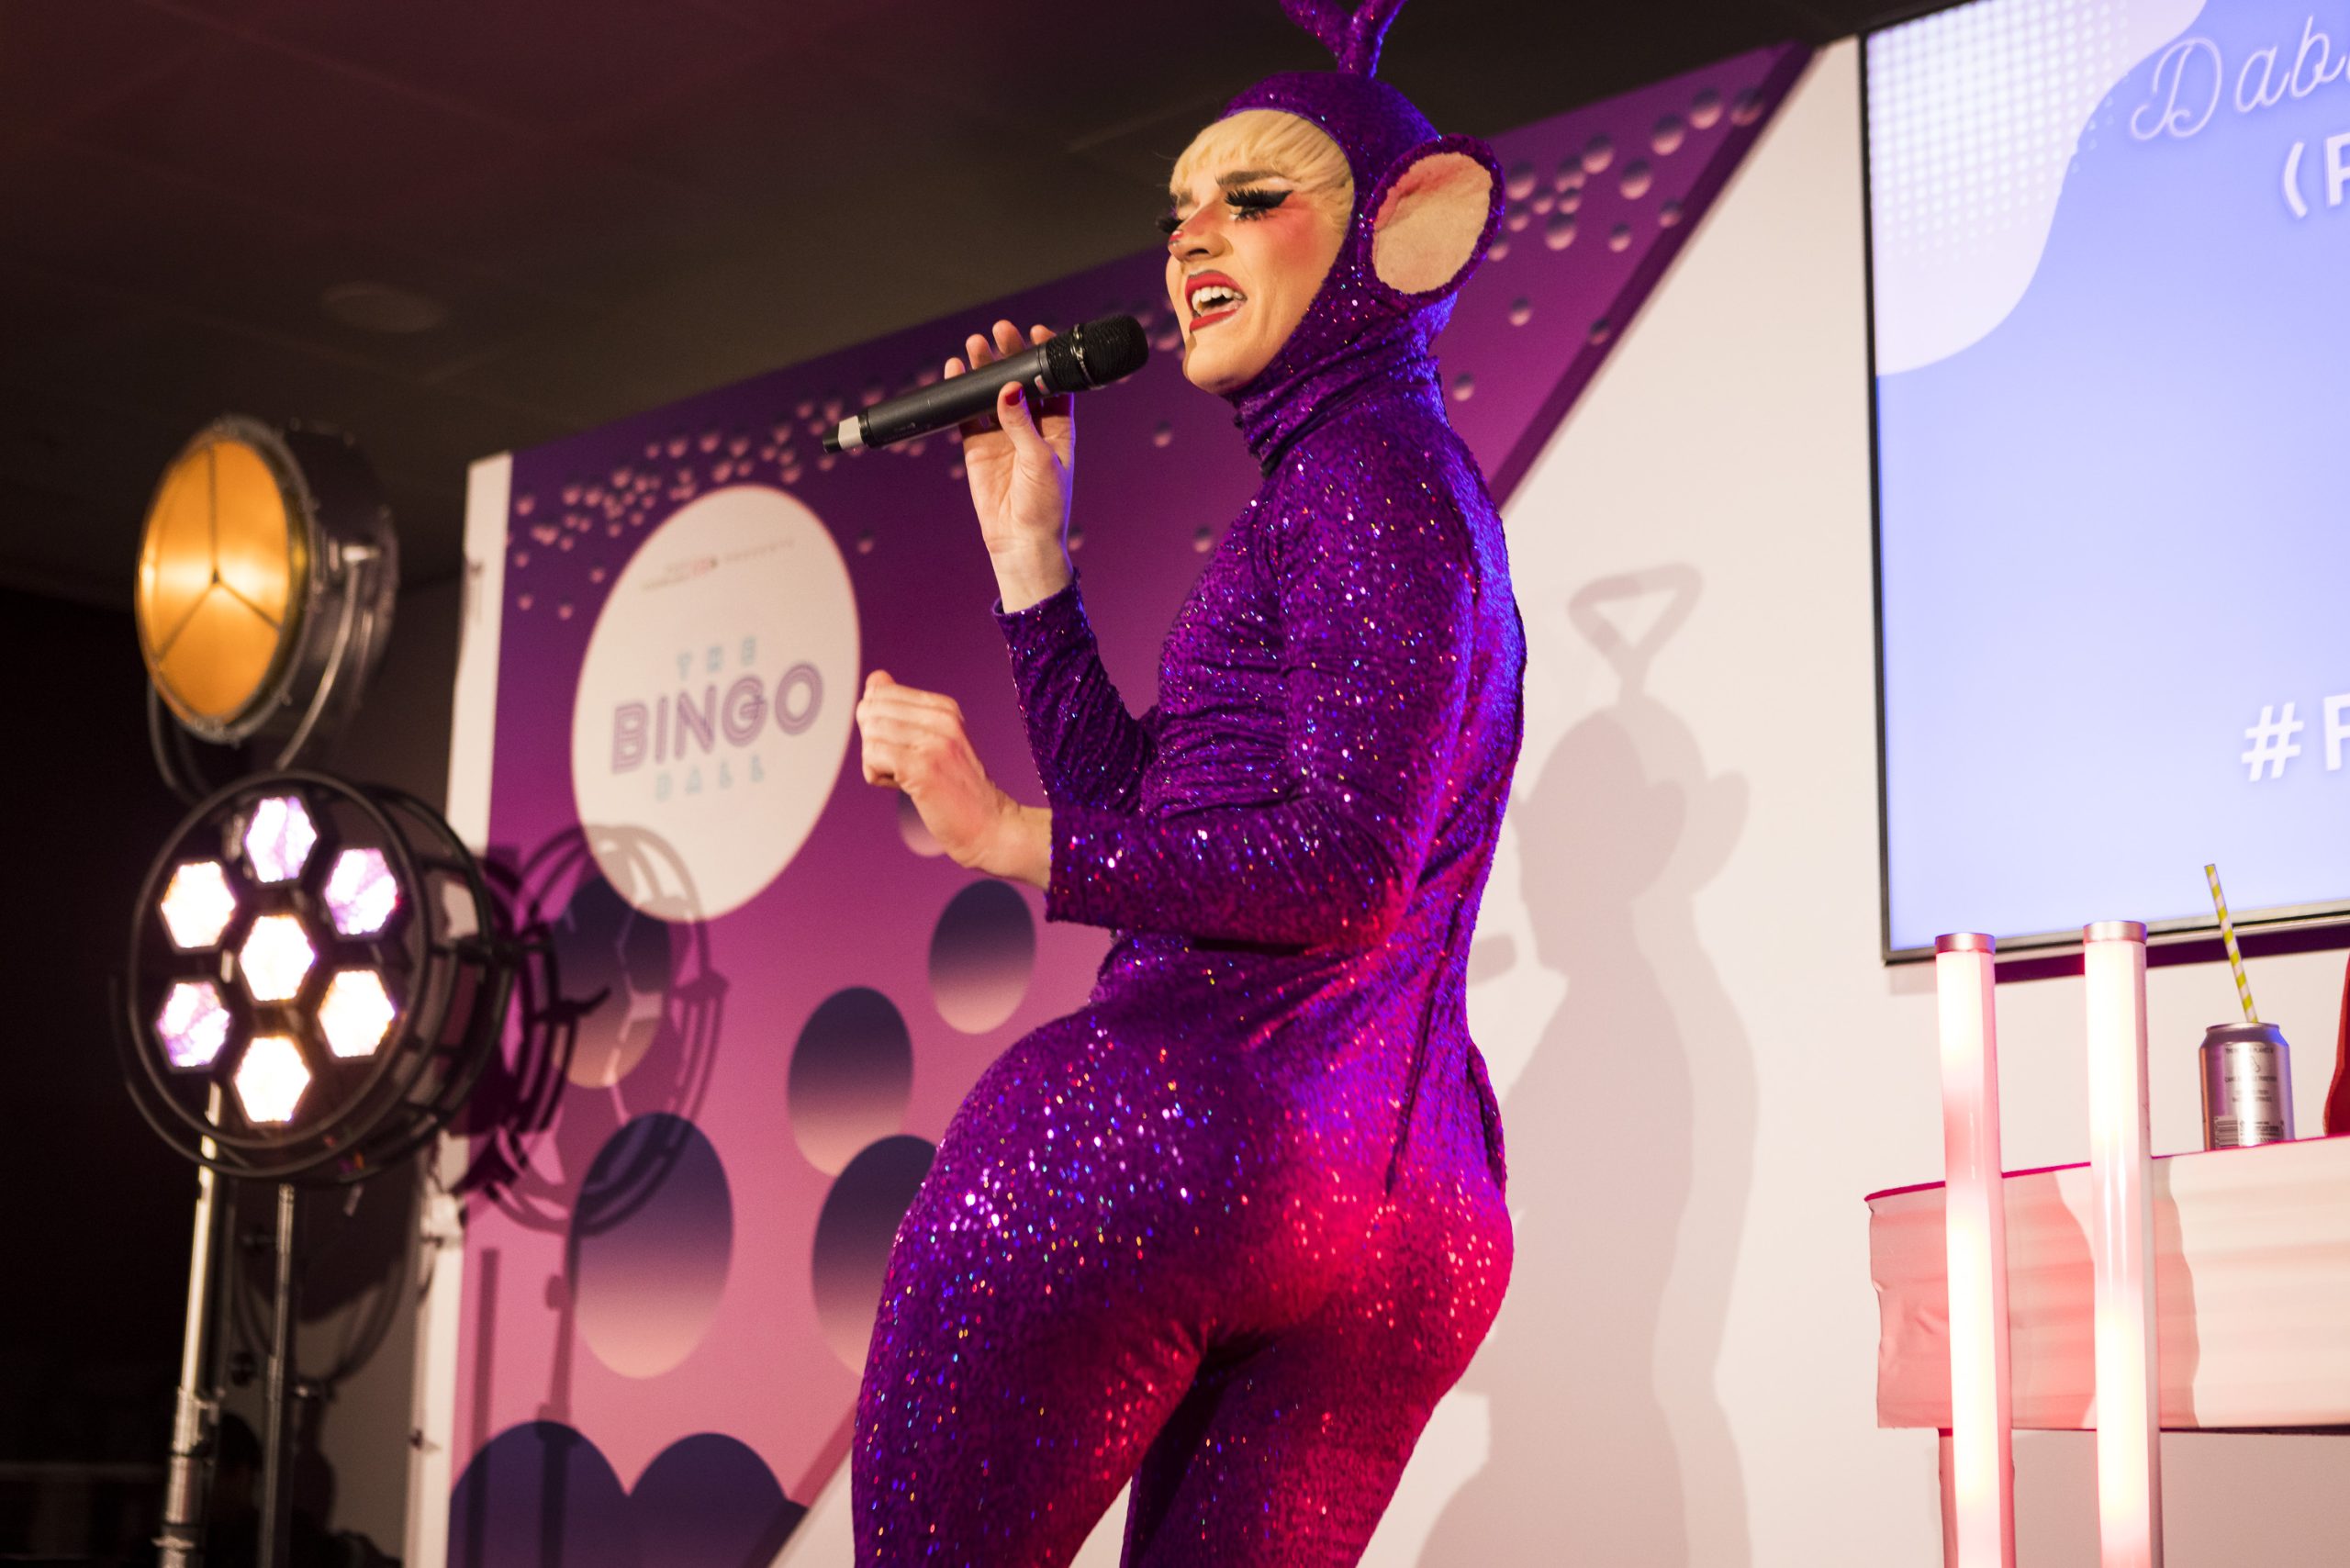 white appearing drag artist wearing a sequenced jump suit with their back towards the camera